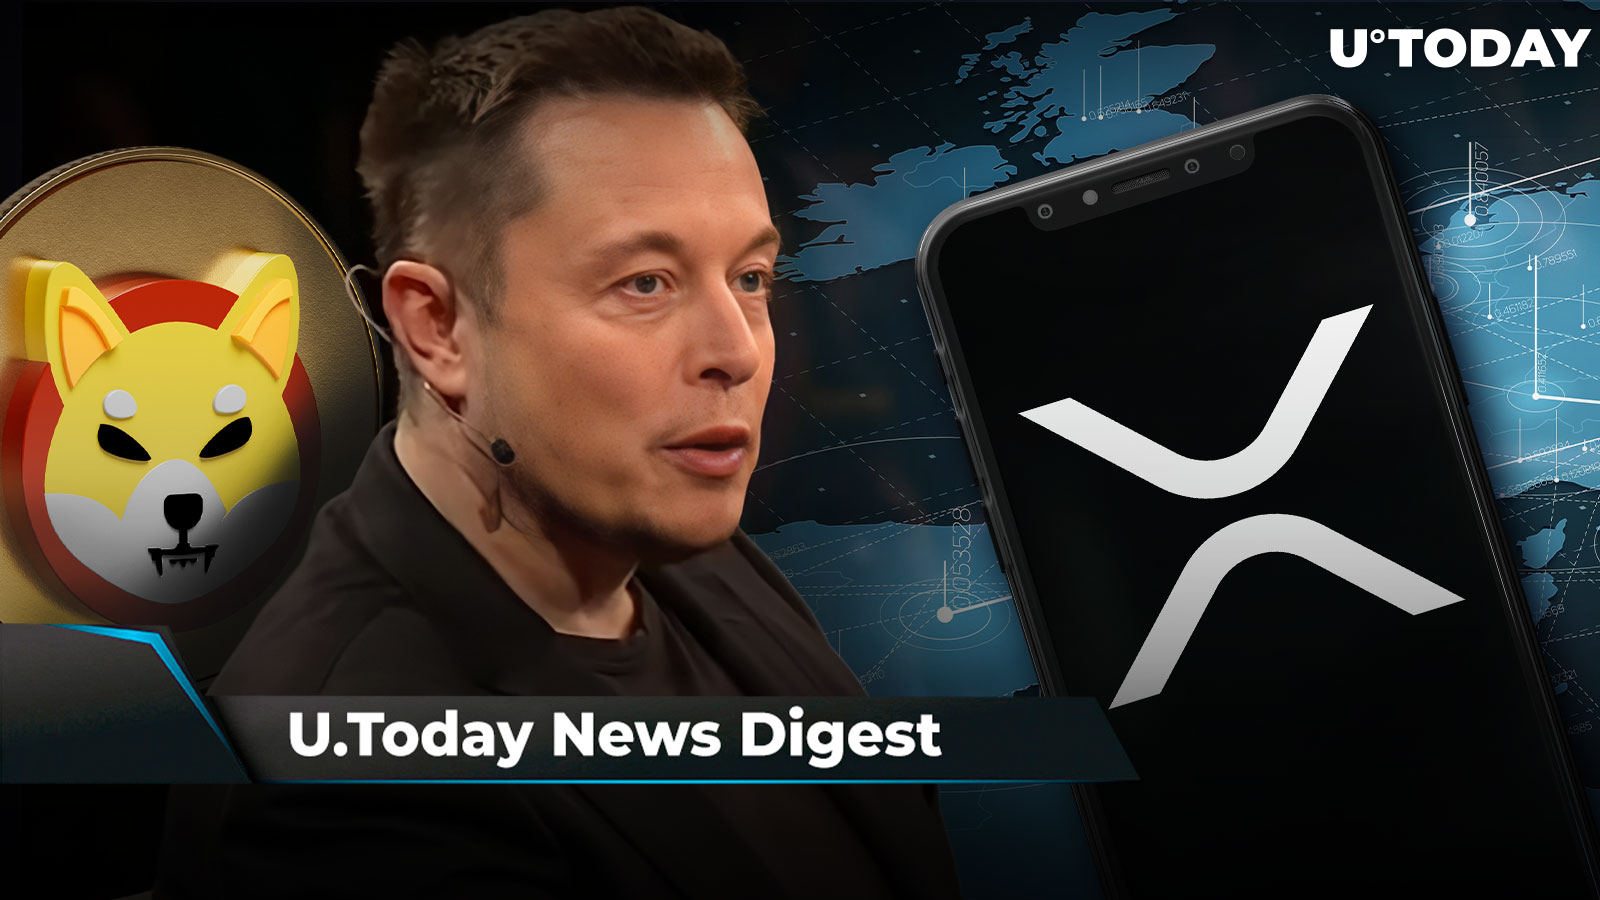 Elon Musk Sells His Perfume for SHIB, XRP Can Be Easily Bought in Europe, Ripple CEO Predicts When SEC Lawsuit Will End: Crypto News Digest by U.Today